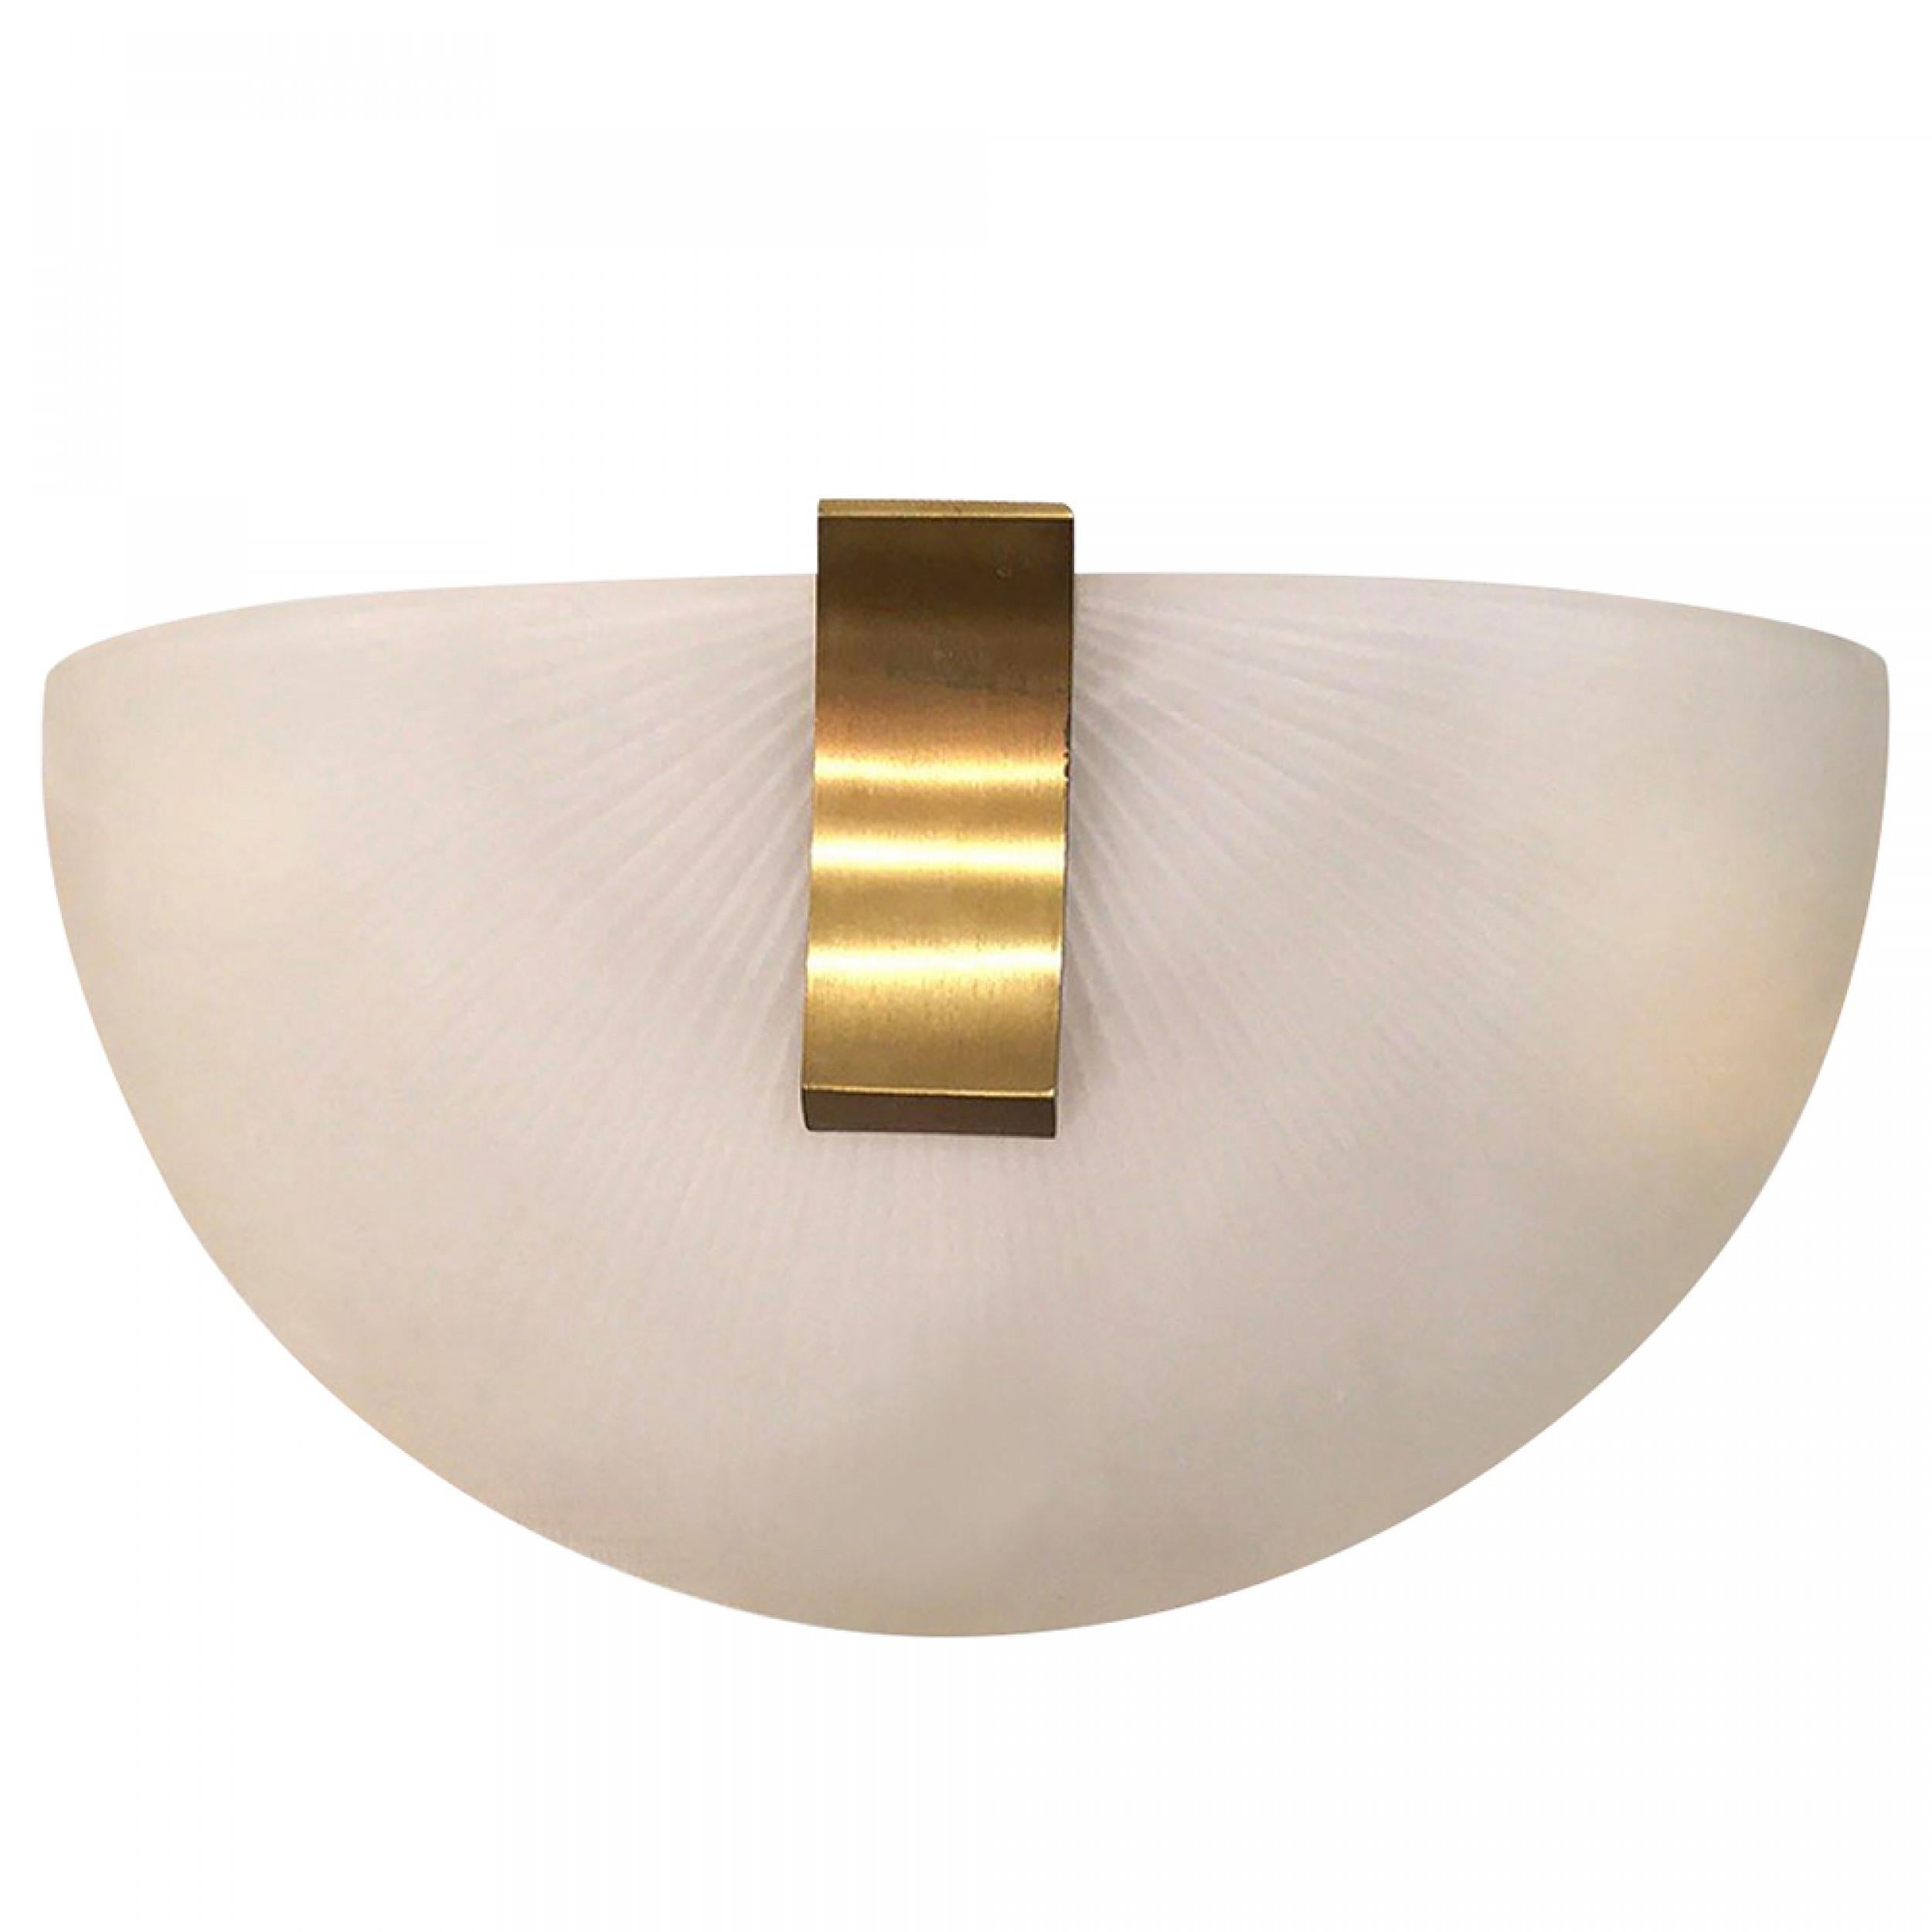 4 French Art Moderne (1950s) wall sconces with white frosted half-round glass shades with a fluted design and a bronze bracket bottom. (signed JEAN PERZEL) (PRICED EACH).